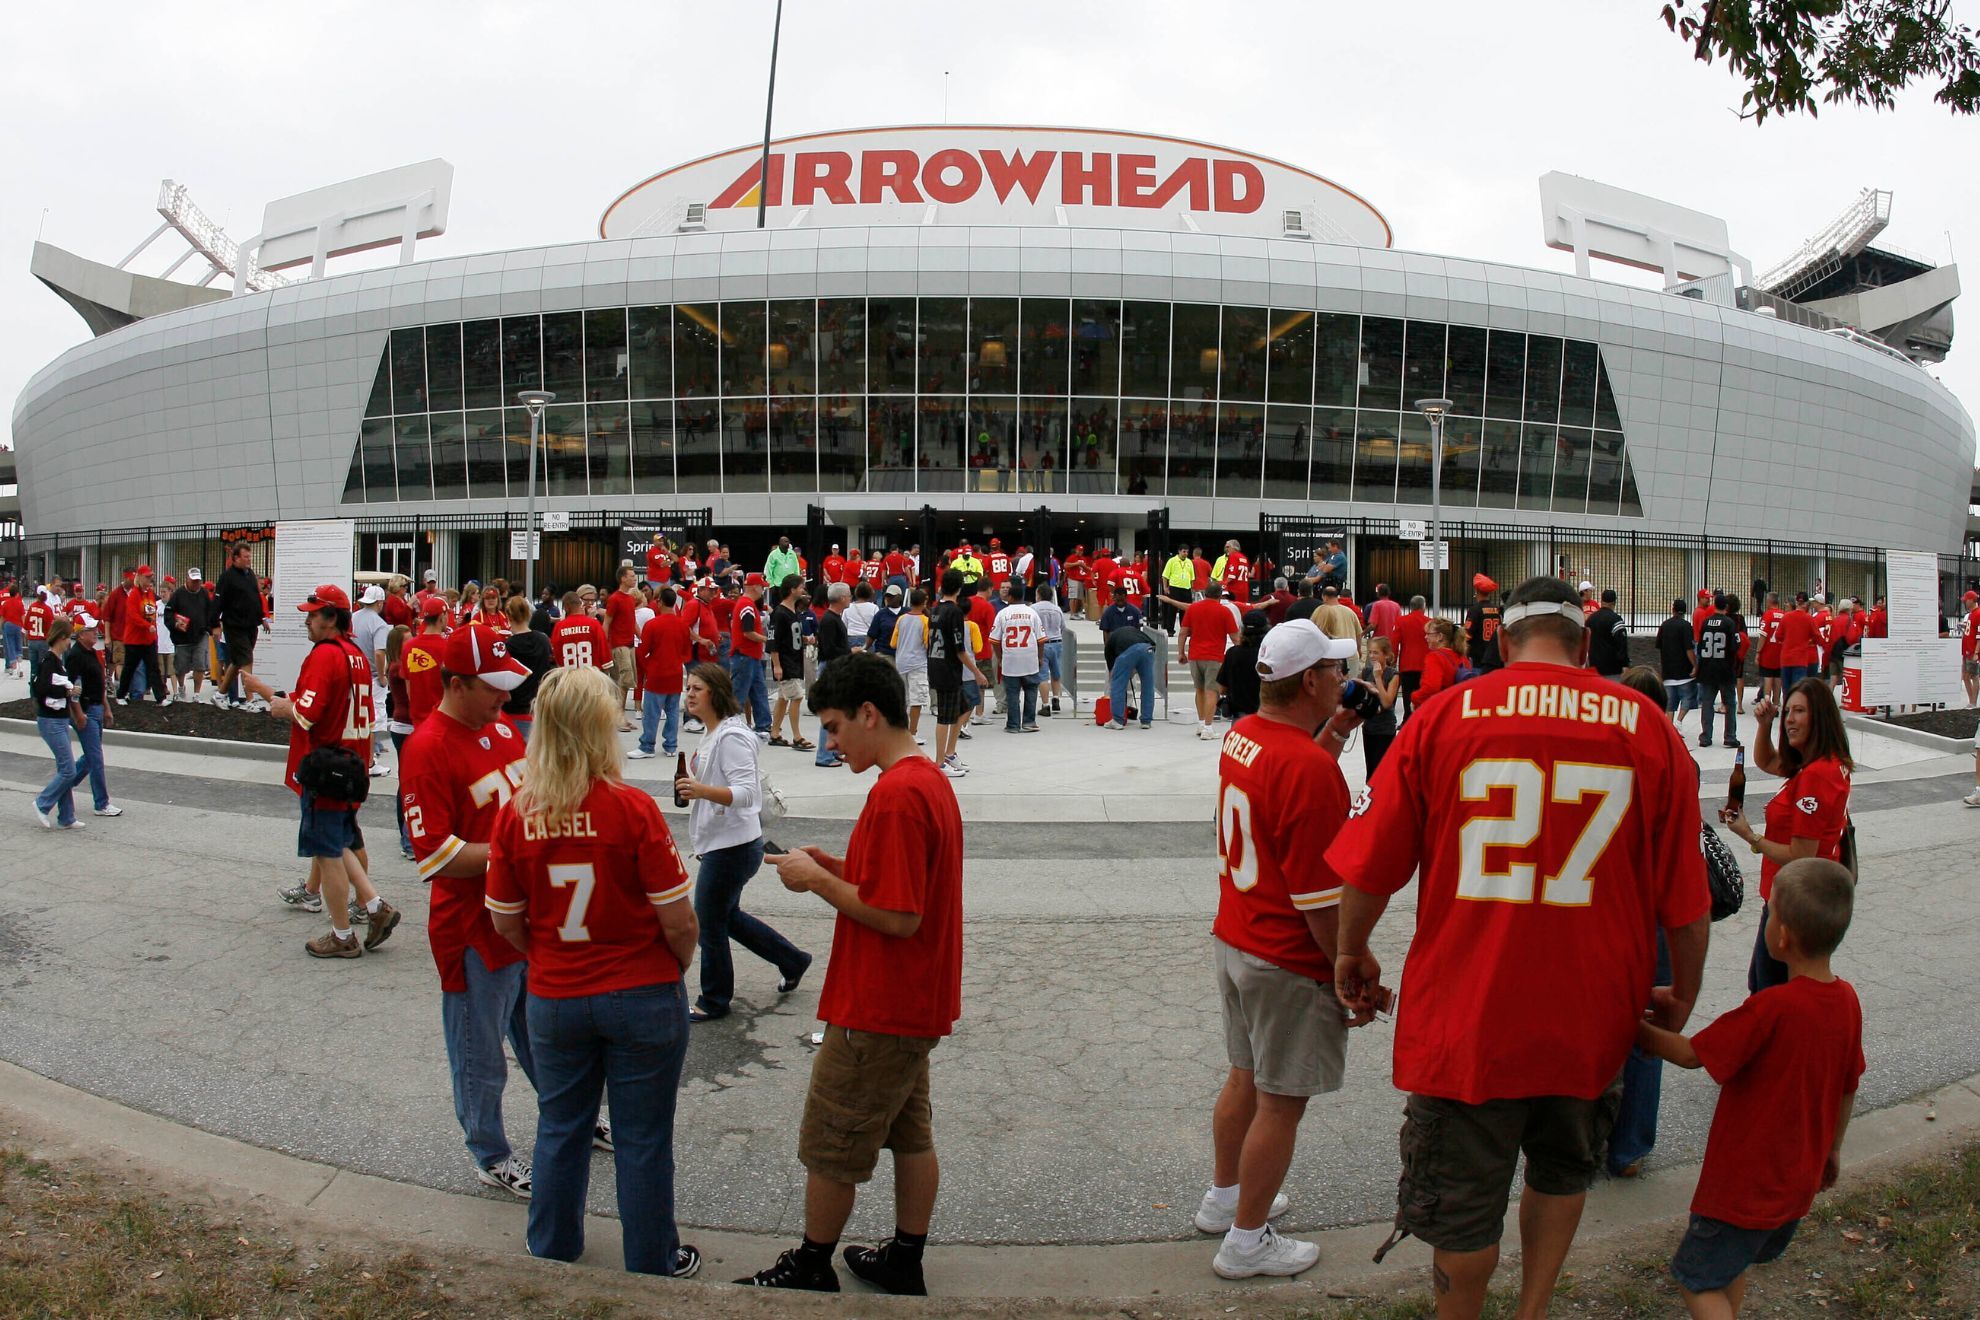 Chiefs owner exploring leaving Arrowhead and Kansas City after sales tax funding for renovations was rejected